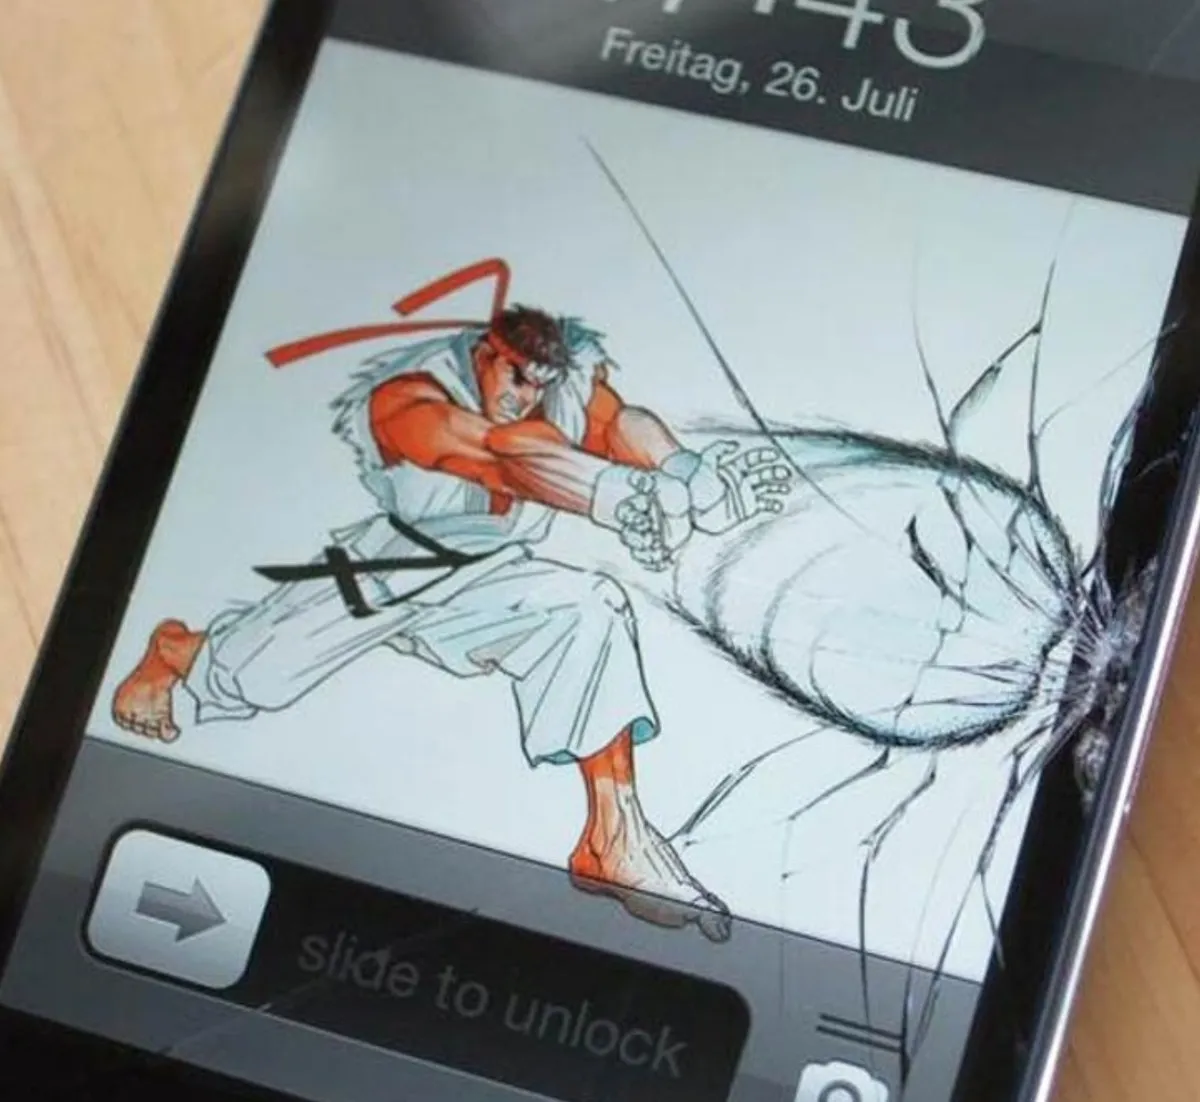 Person comically uses wallpaper to make cracked screen look cool